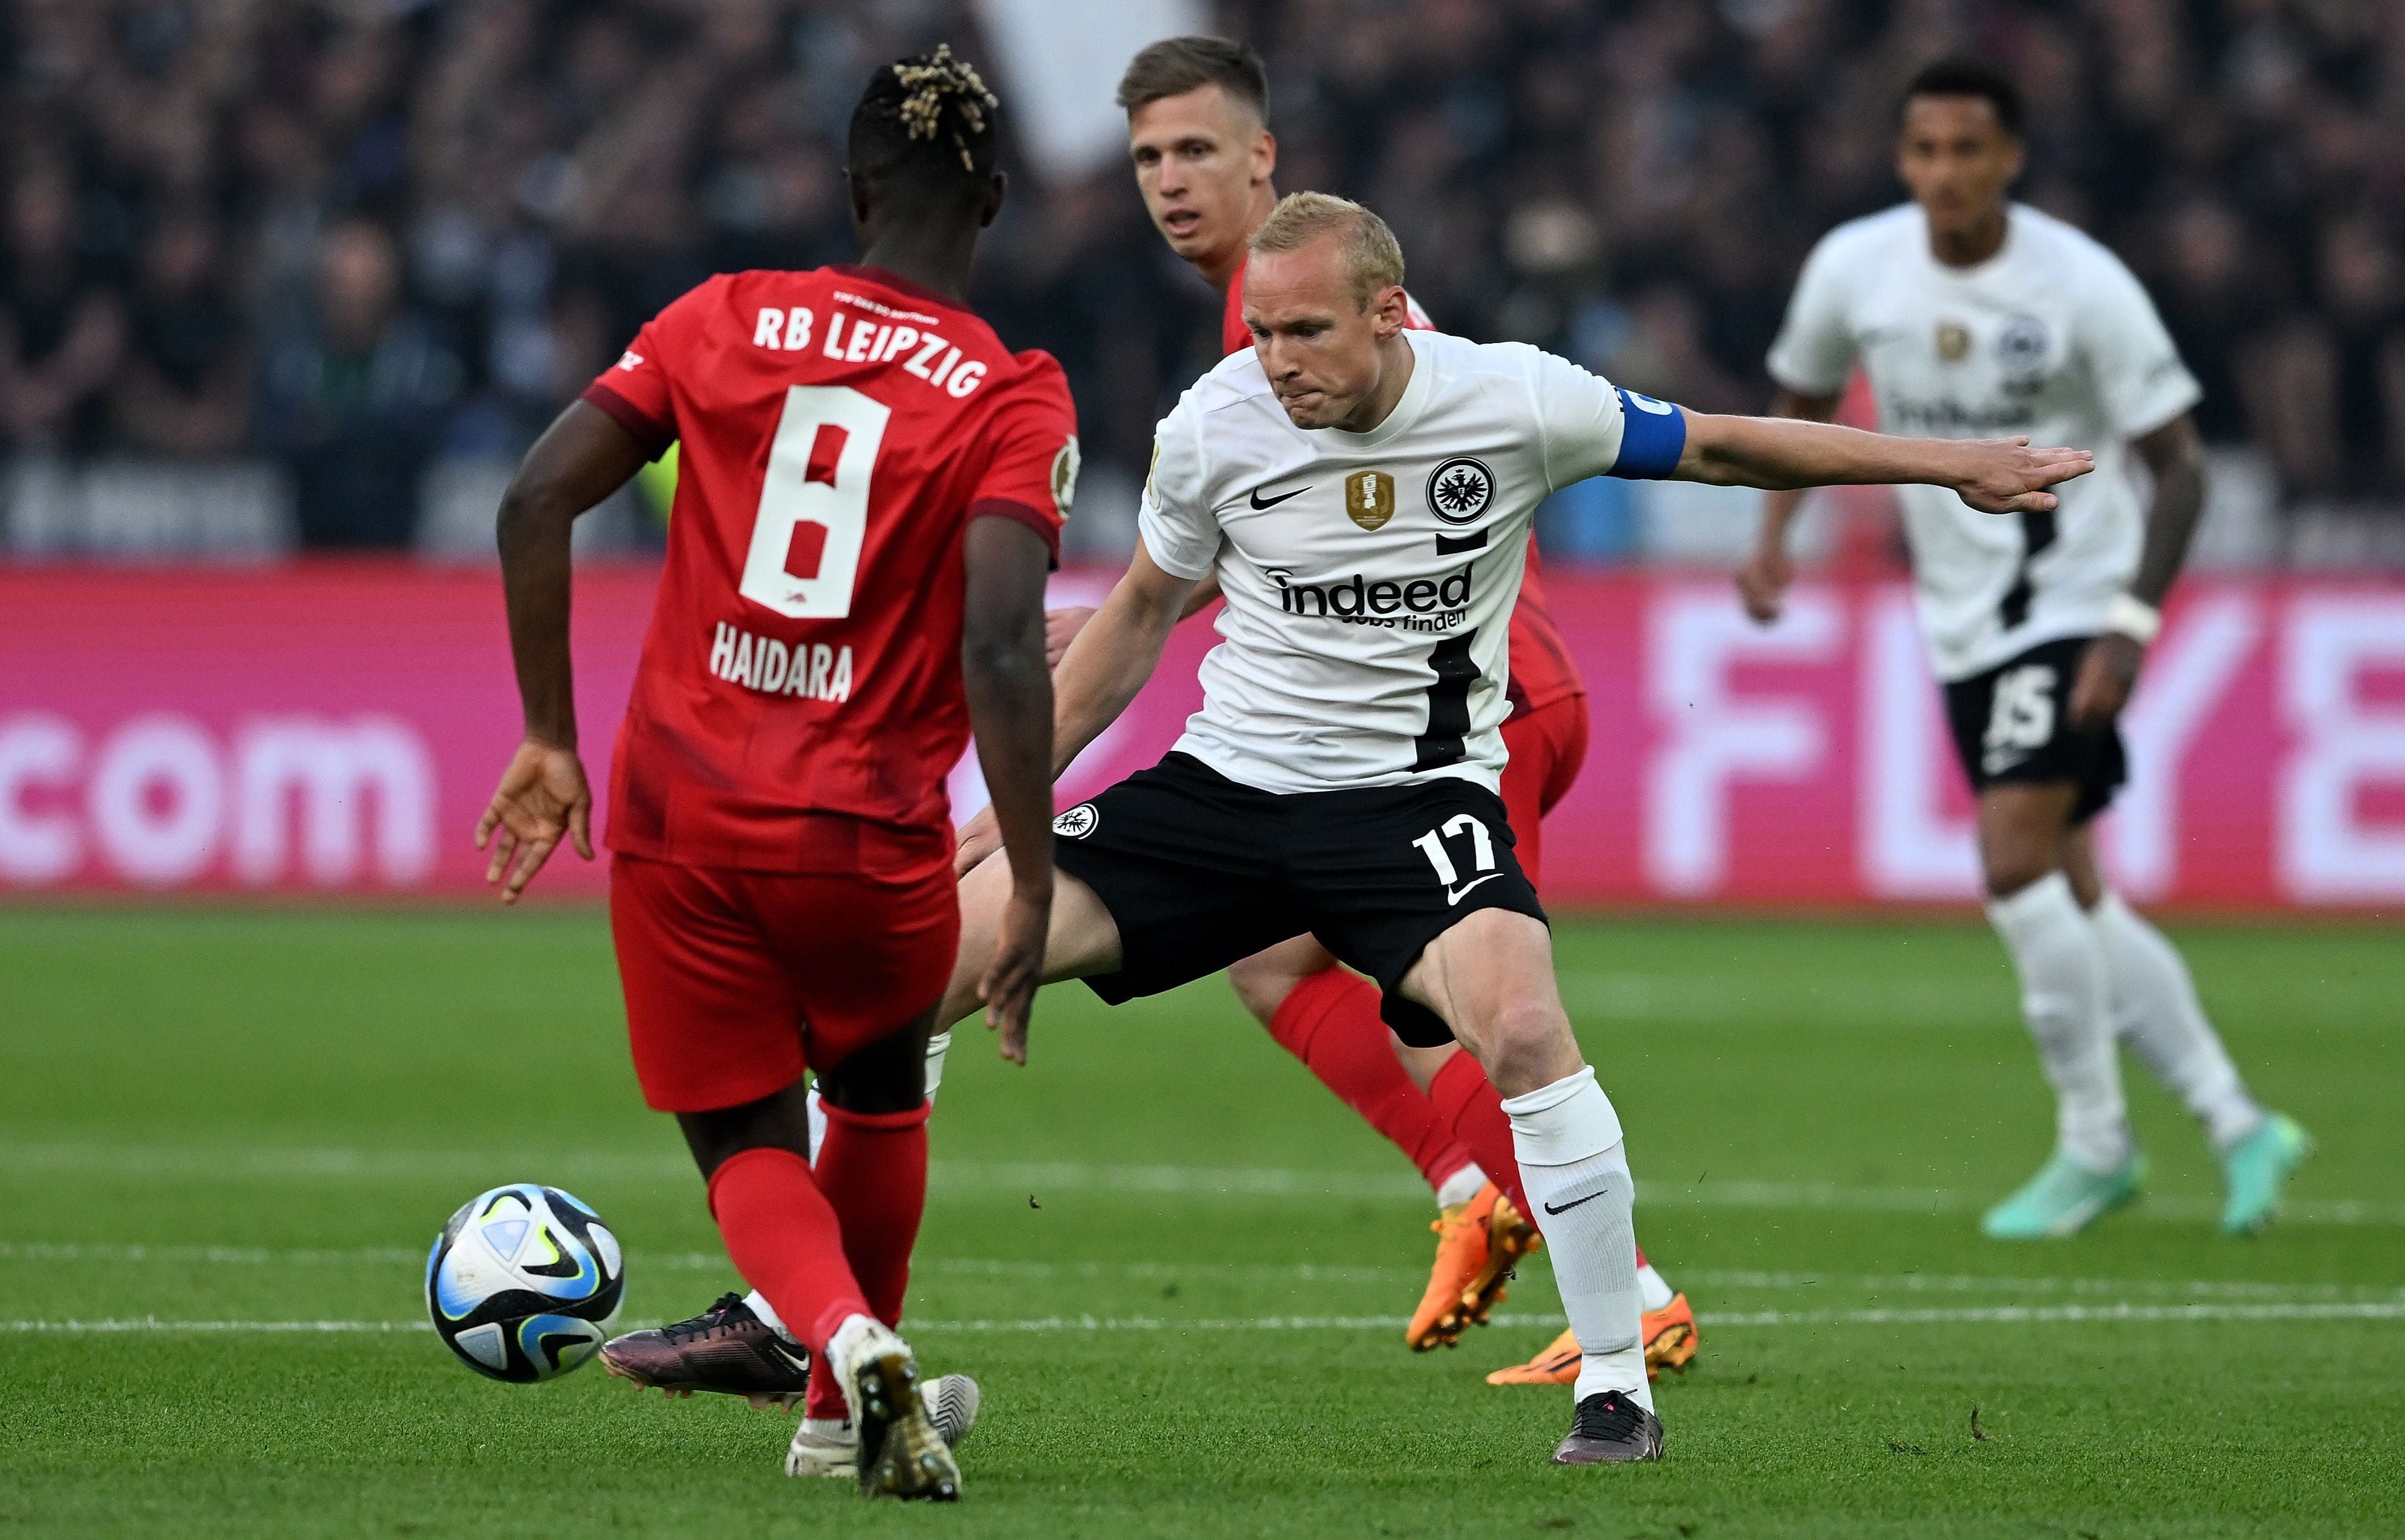 Berlin (Germany), 03/06/2023.- Sebastian Rode of Frankfurt (R) in action with Amadou Haidara of Leipzig (L) during the DFB Pokal cup final soccer match between RB Leipzig and Eintracht Frankfurt, in Berlin, Germany, 03 June 2023. (Alemania) EFE/EPA/FILIP SINGER CONDITIONS - ATTENTION: The DFB regulations prohibit any use of photographs as image sequences and/or quasi-video.
